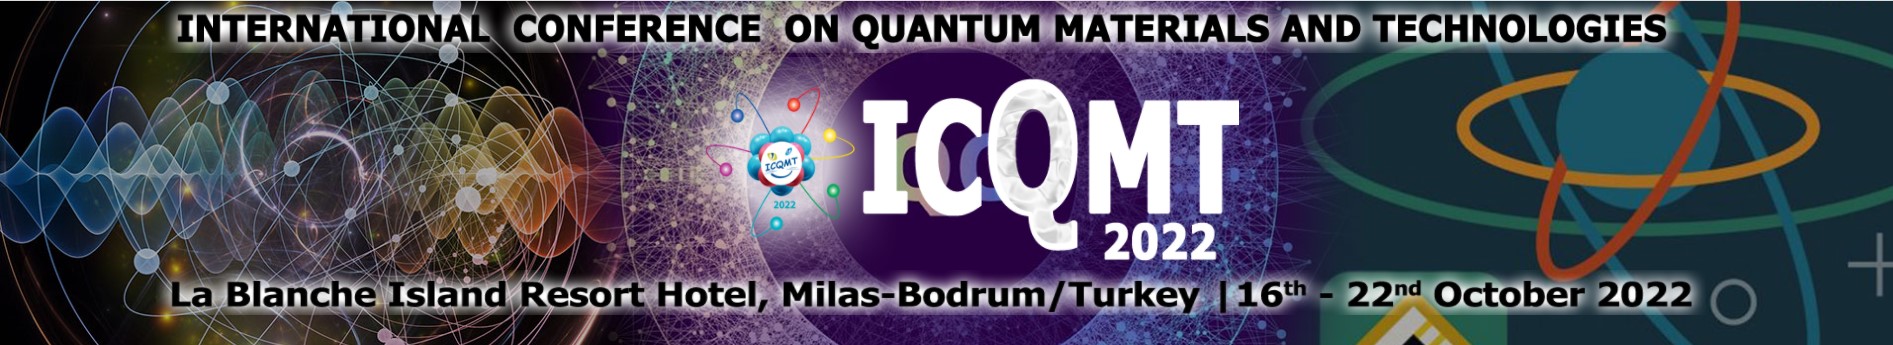 International Conference on Quantum Materials and Technologies – ICQMT2022